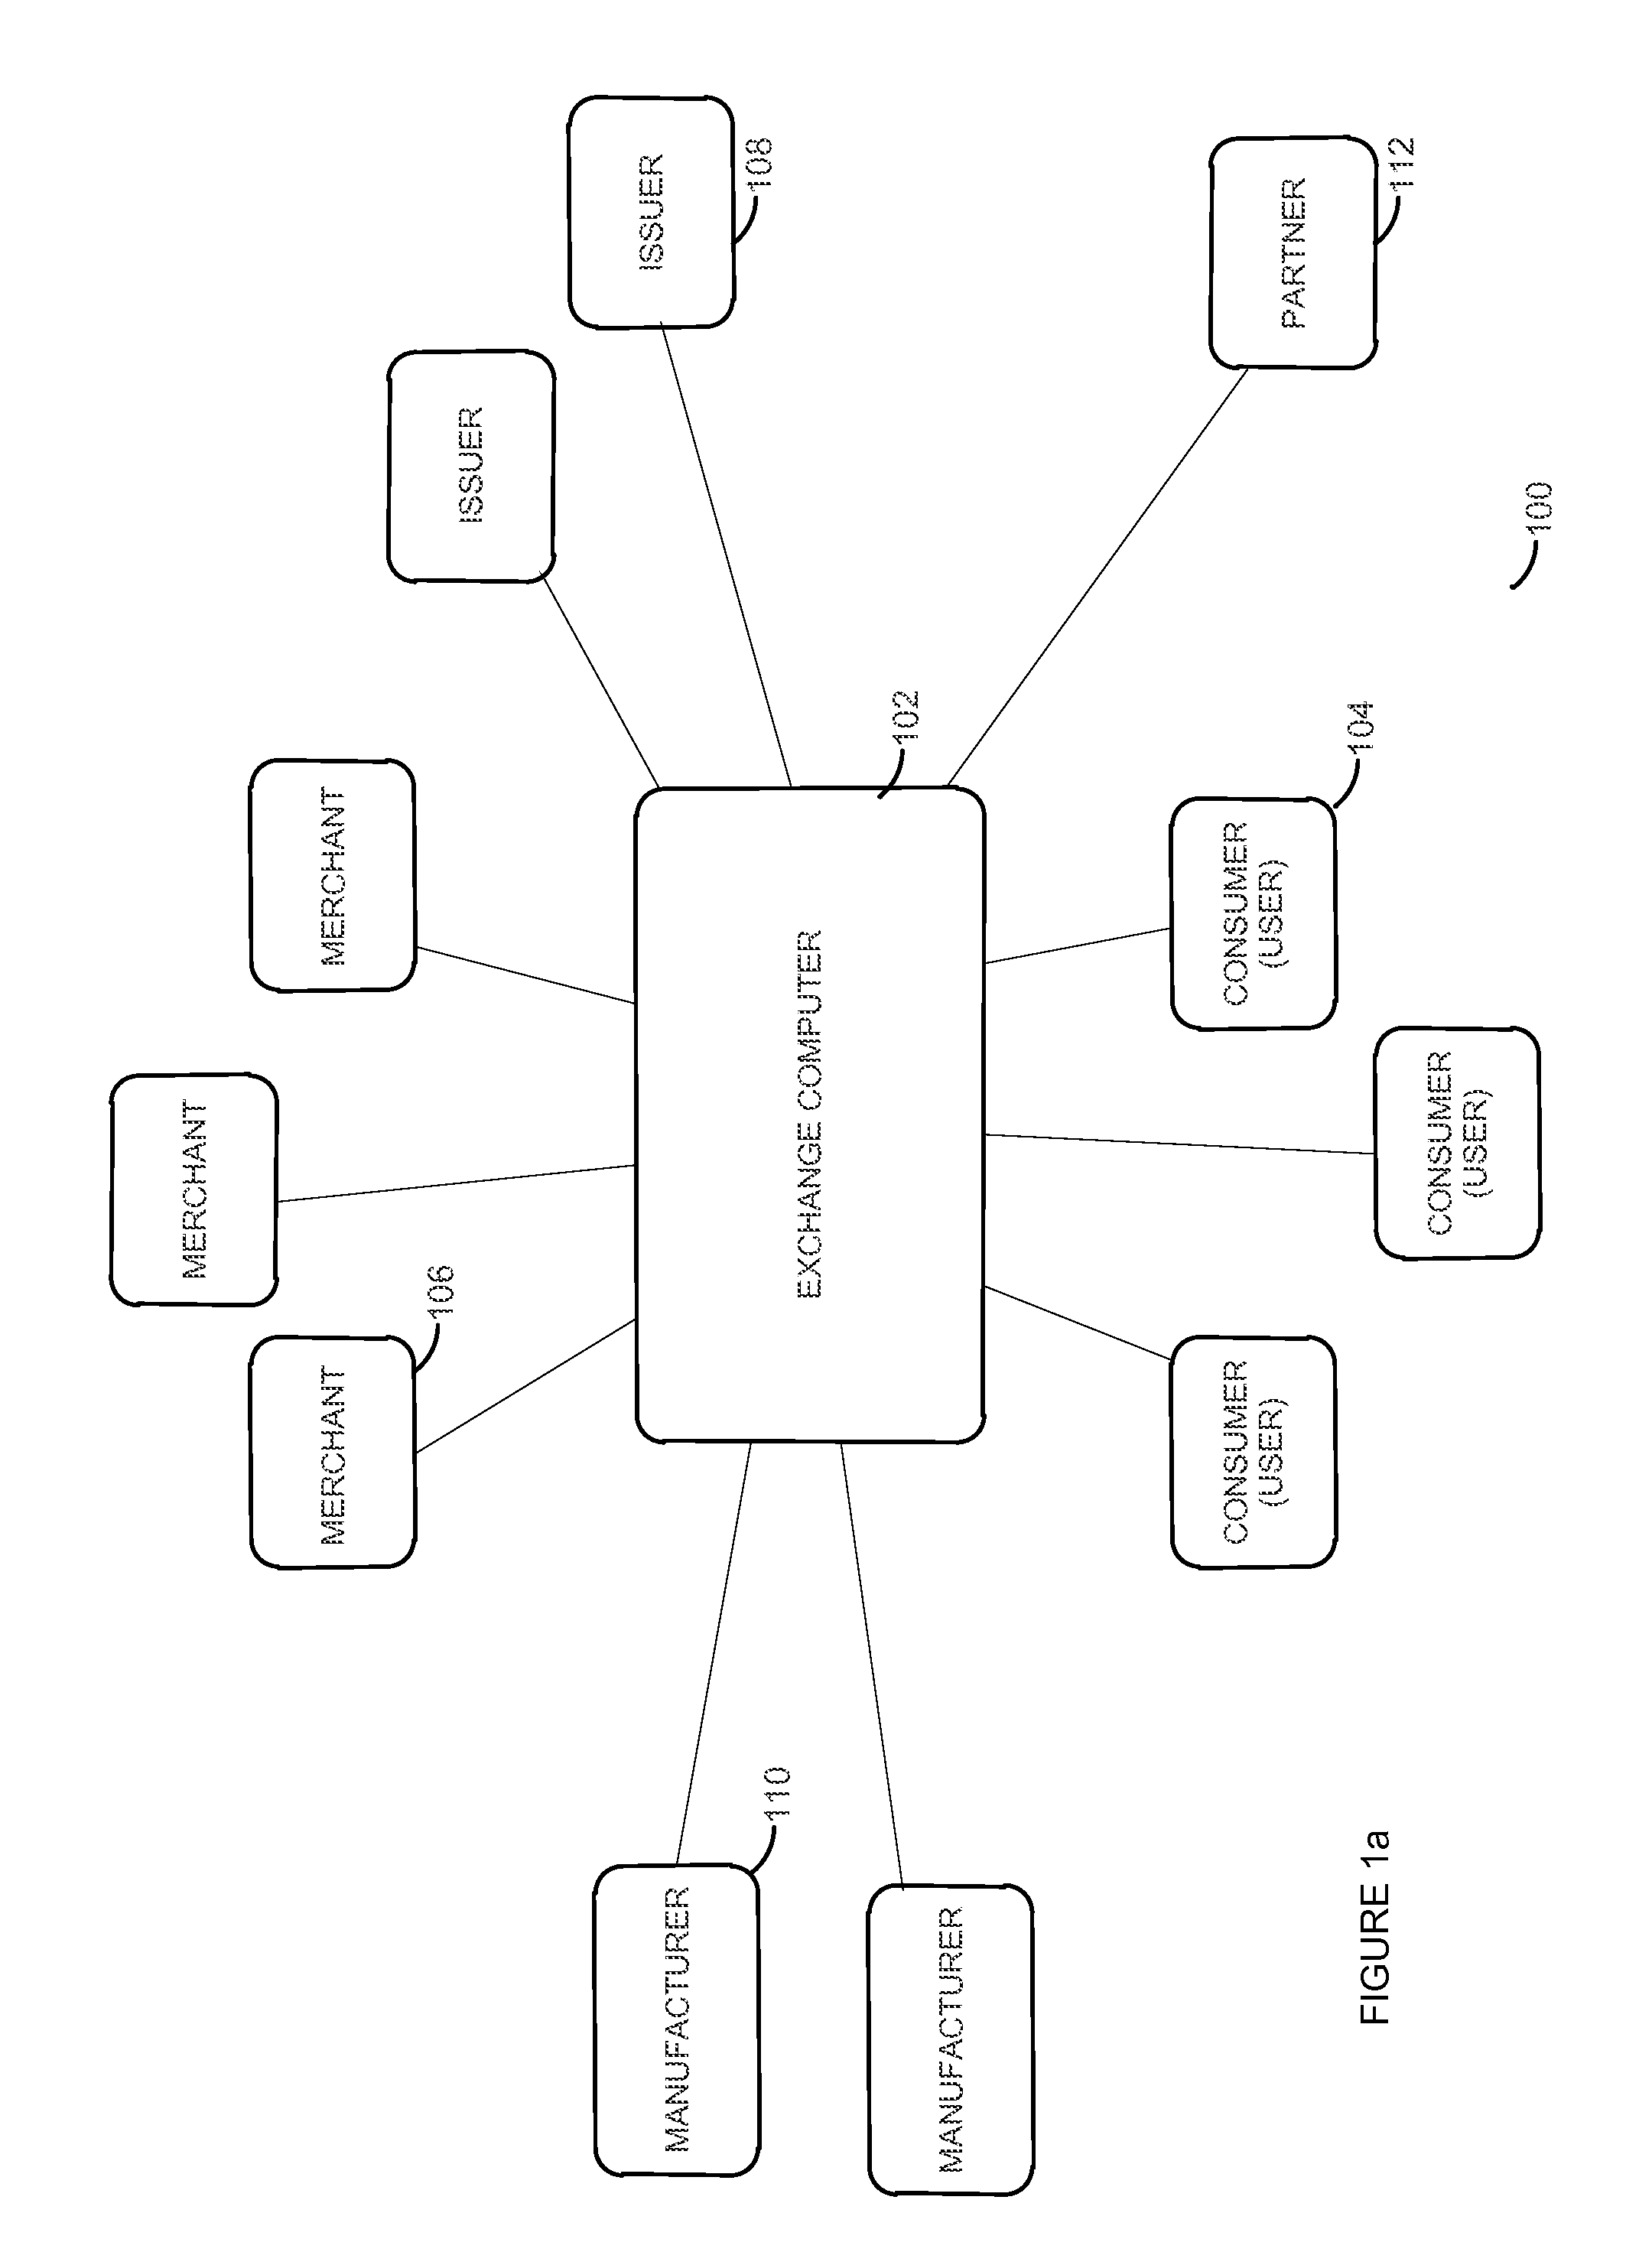 Reward exchange method and system with control of exchanged rewards and monetary consideration